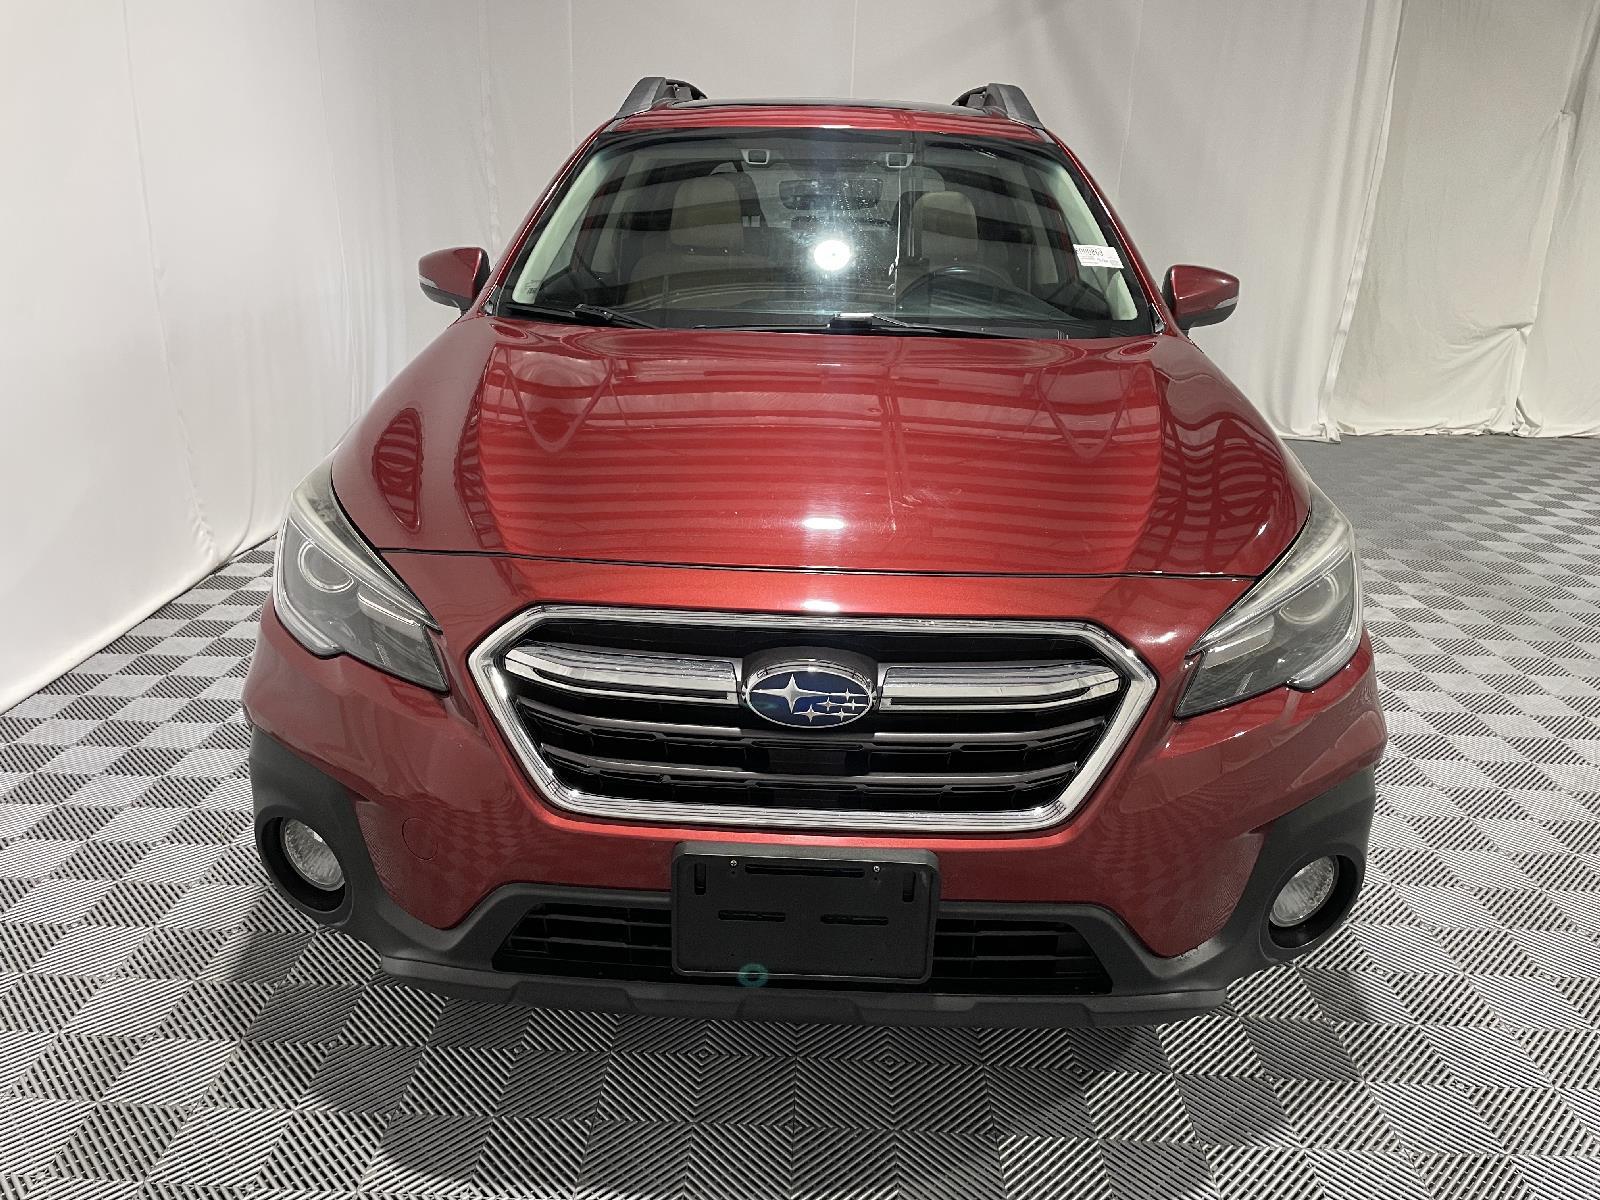 Used 2019 Subaru Outback Limited SUV for sale in St Joseph MO